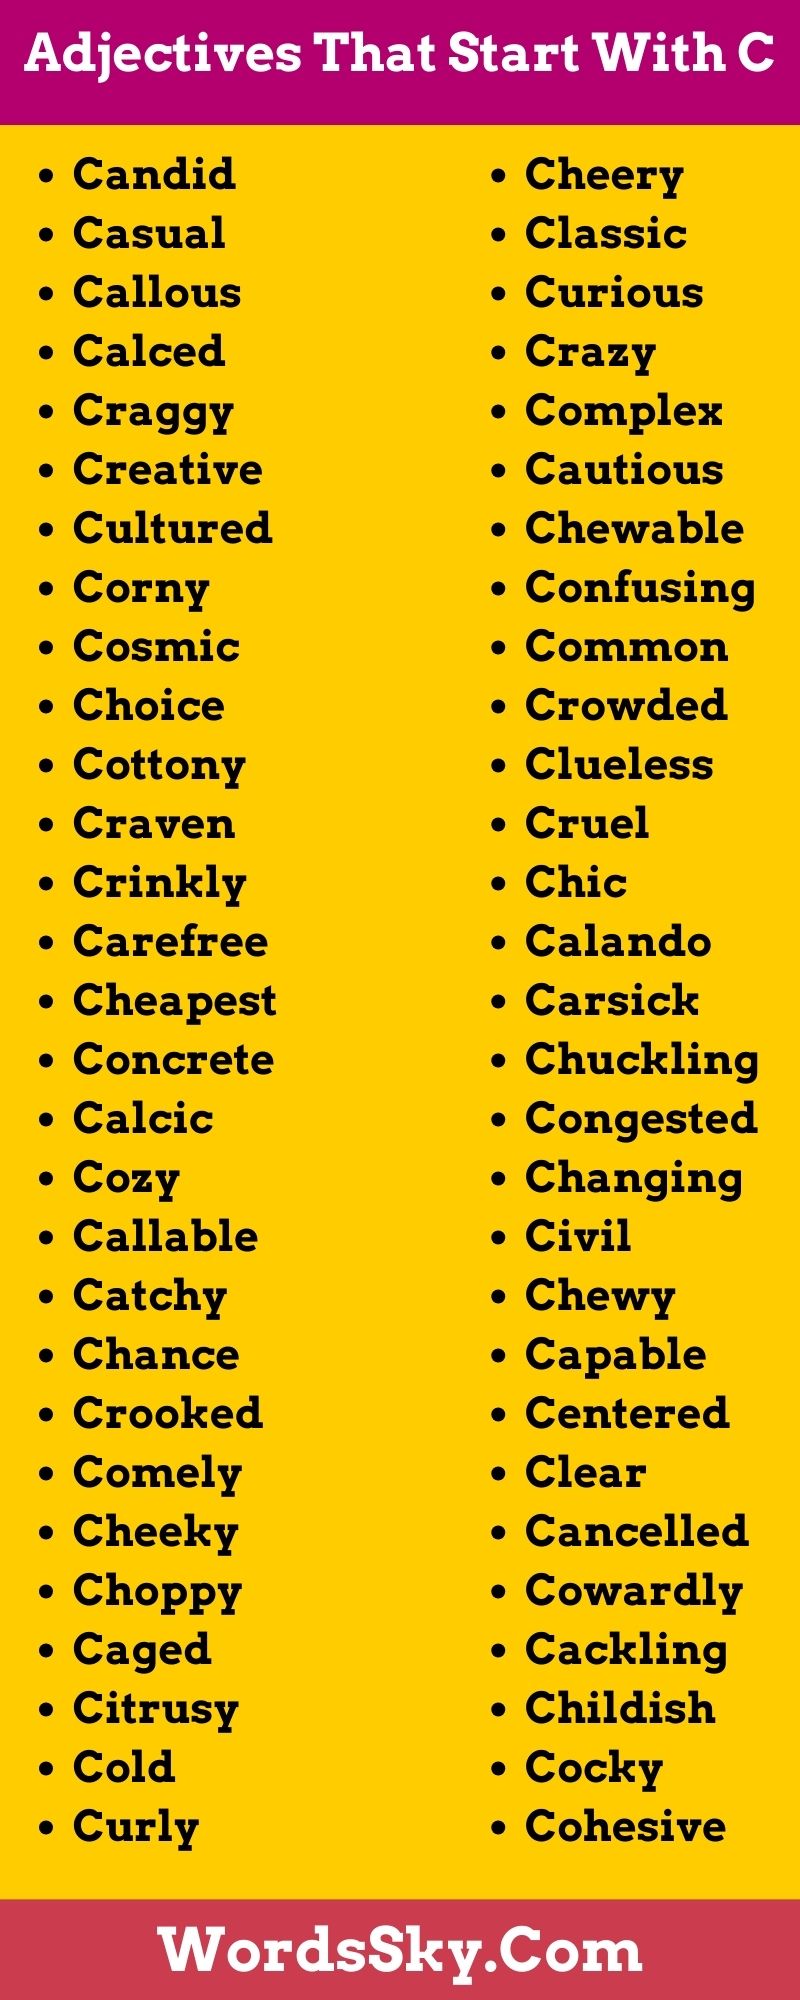 Adjectives That Start With C